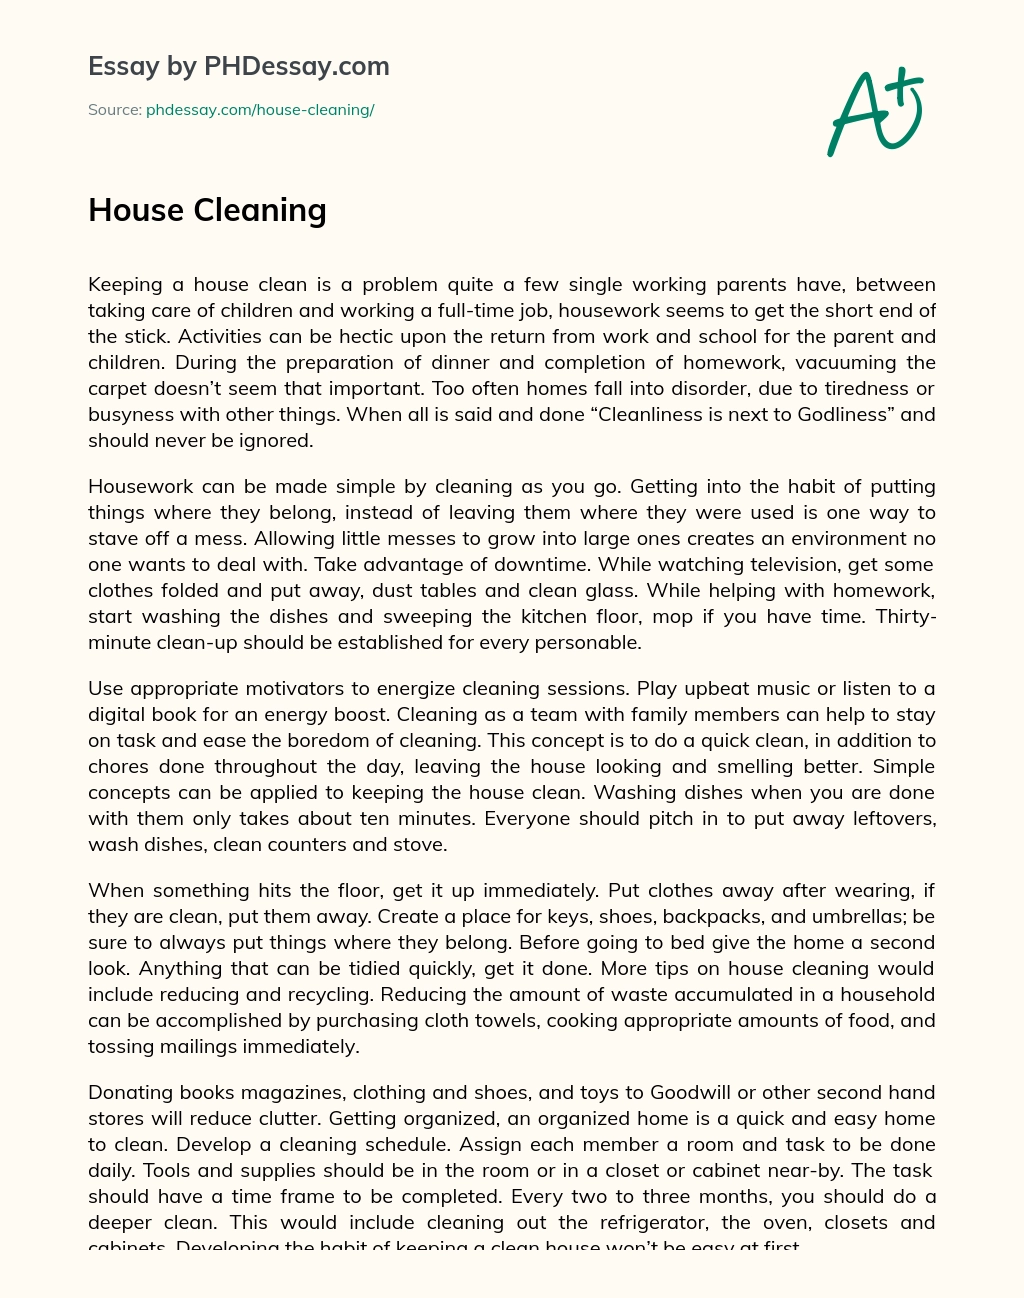 House Cleaning essay